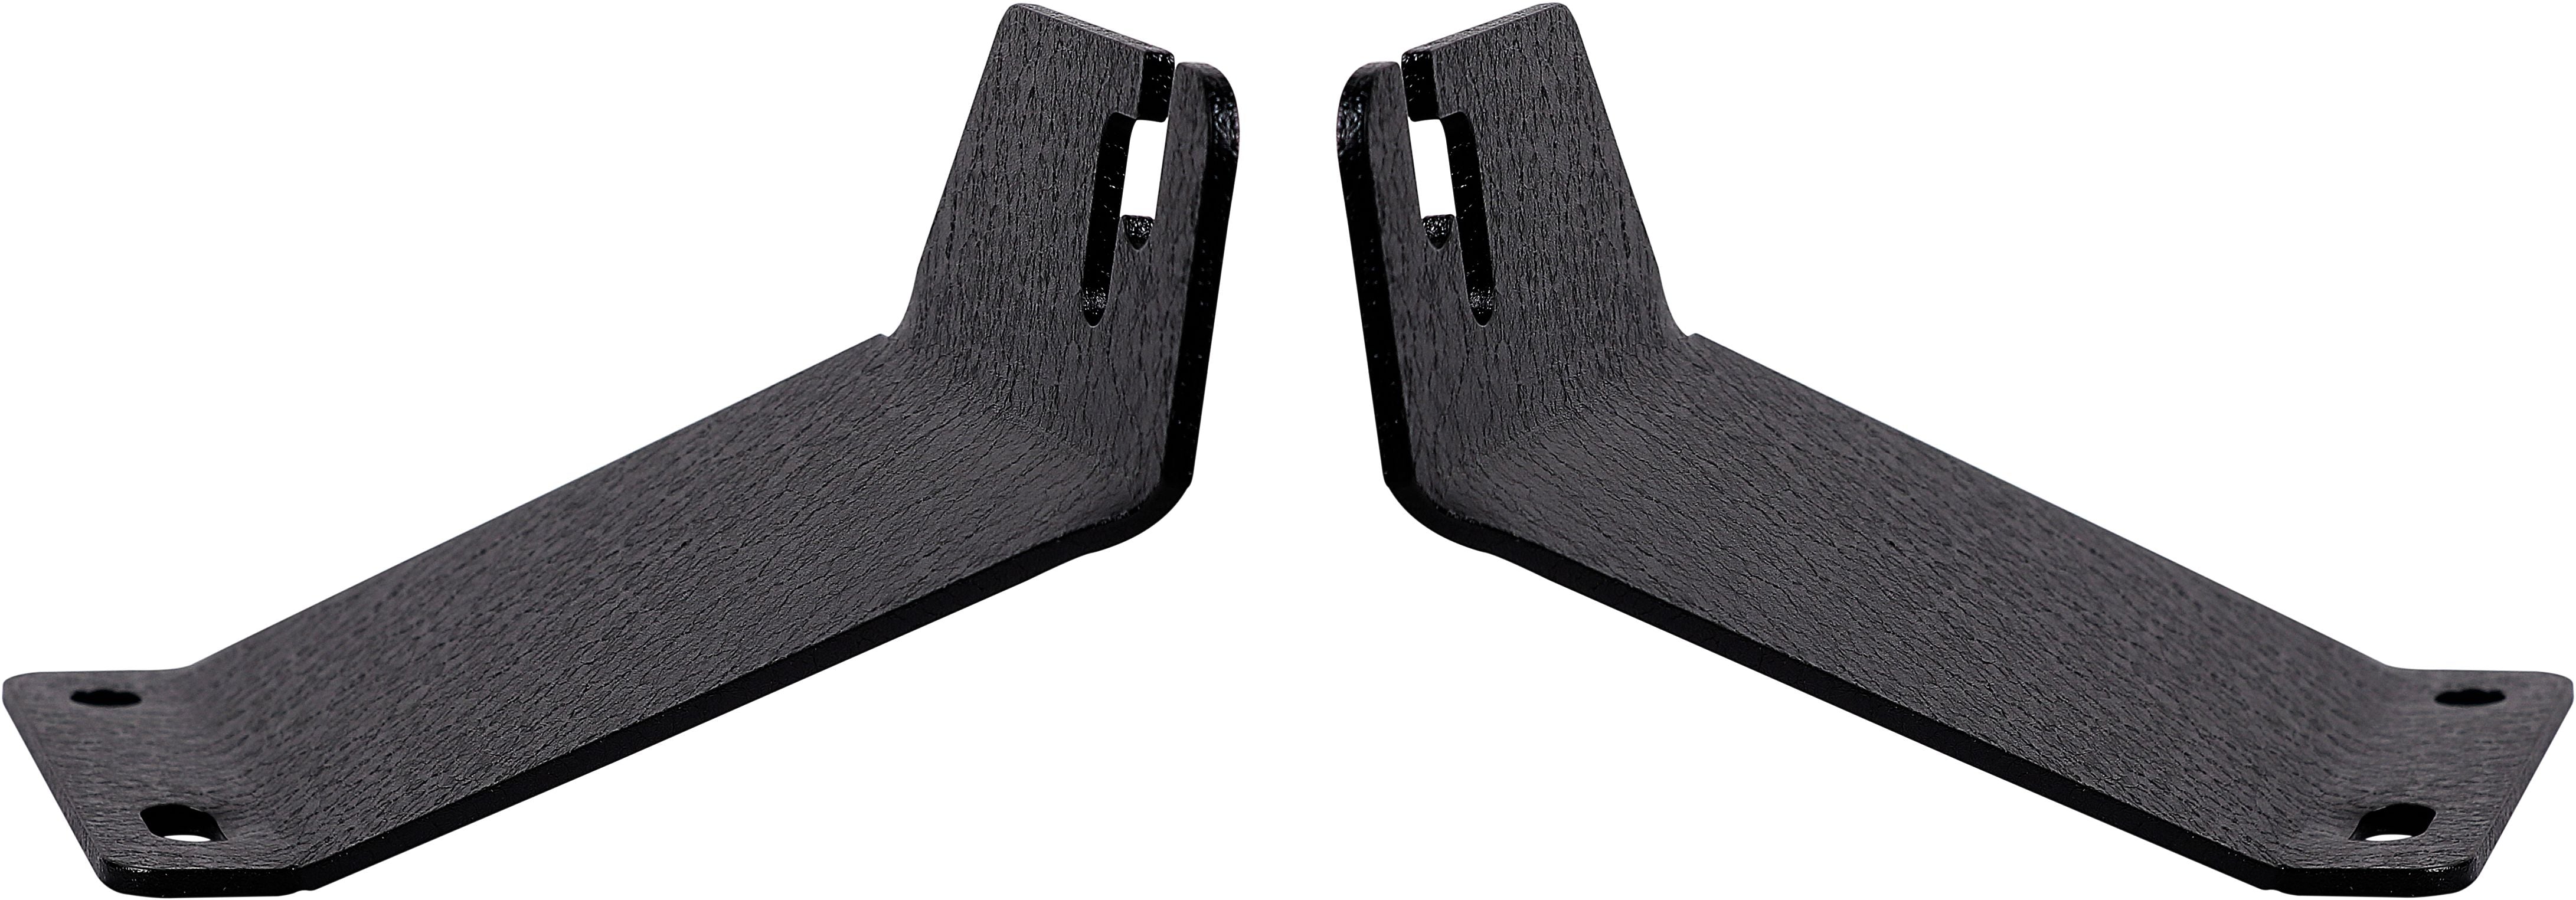 CLD CLDBRK13 - Jeep Auxiliary Mounting Brackets